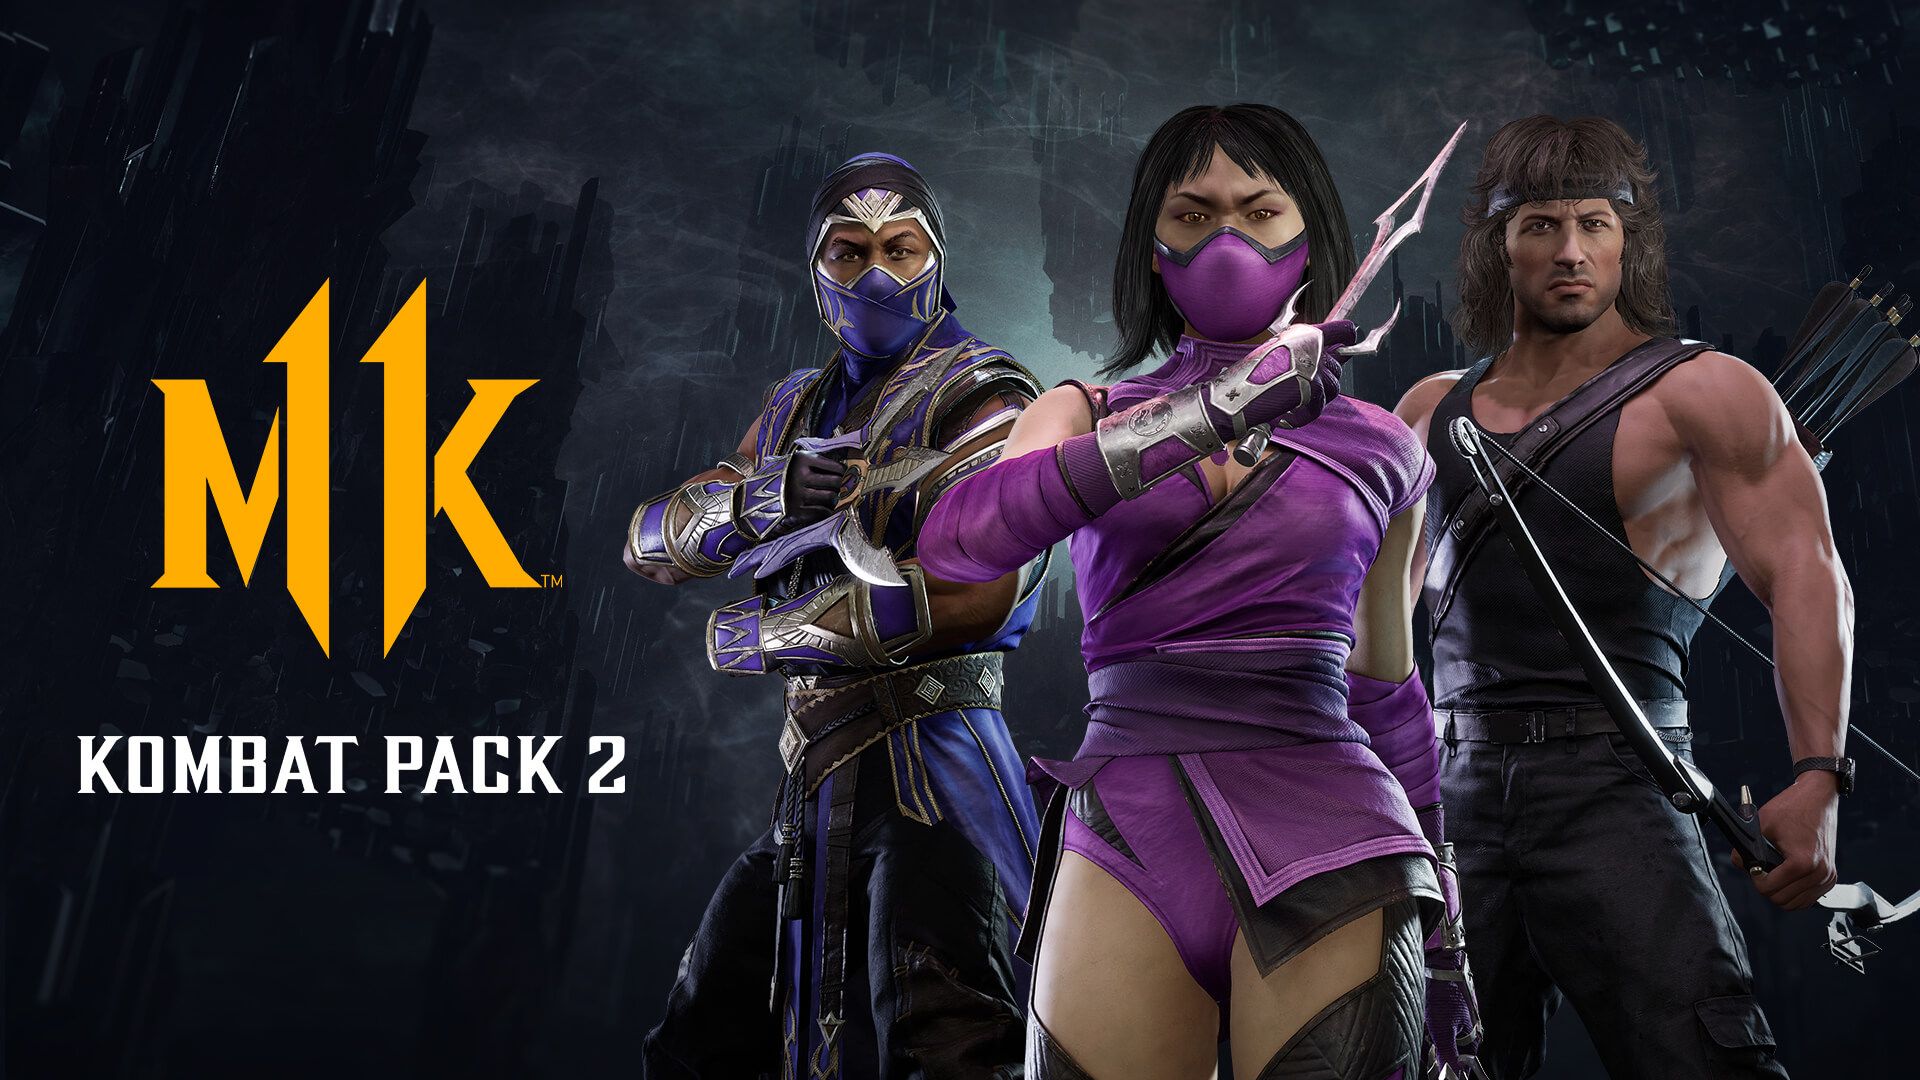 Rumors of the existence of an MK11 Kombat Pack 3 with five characters